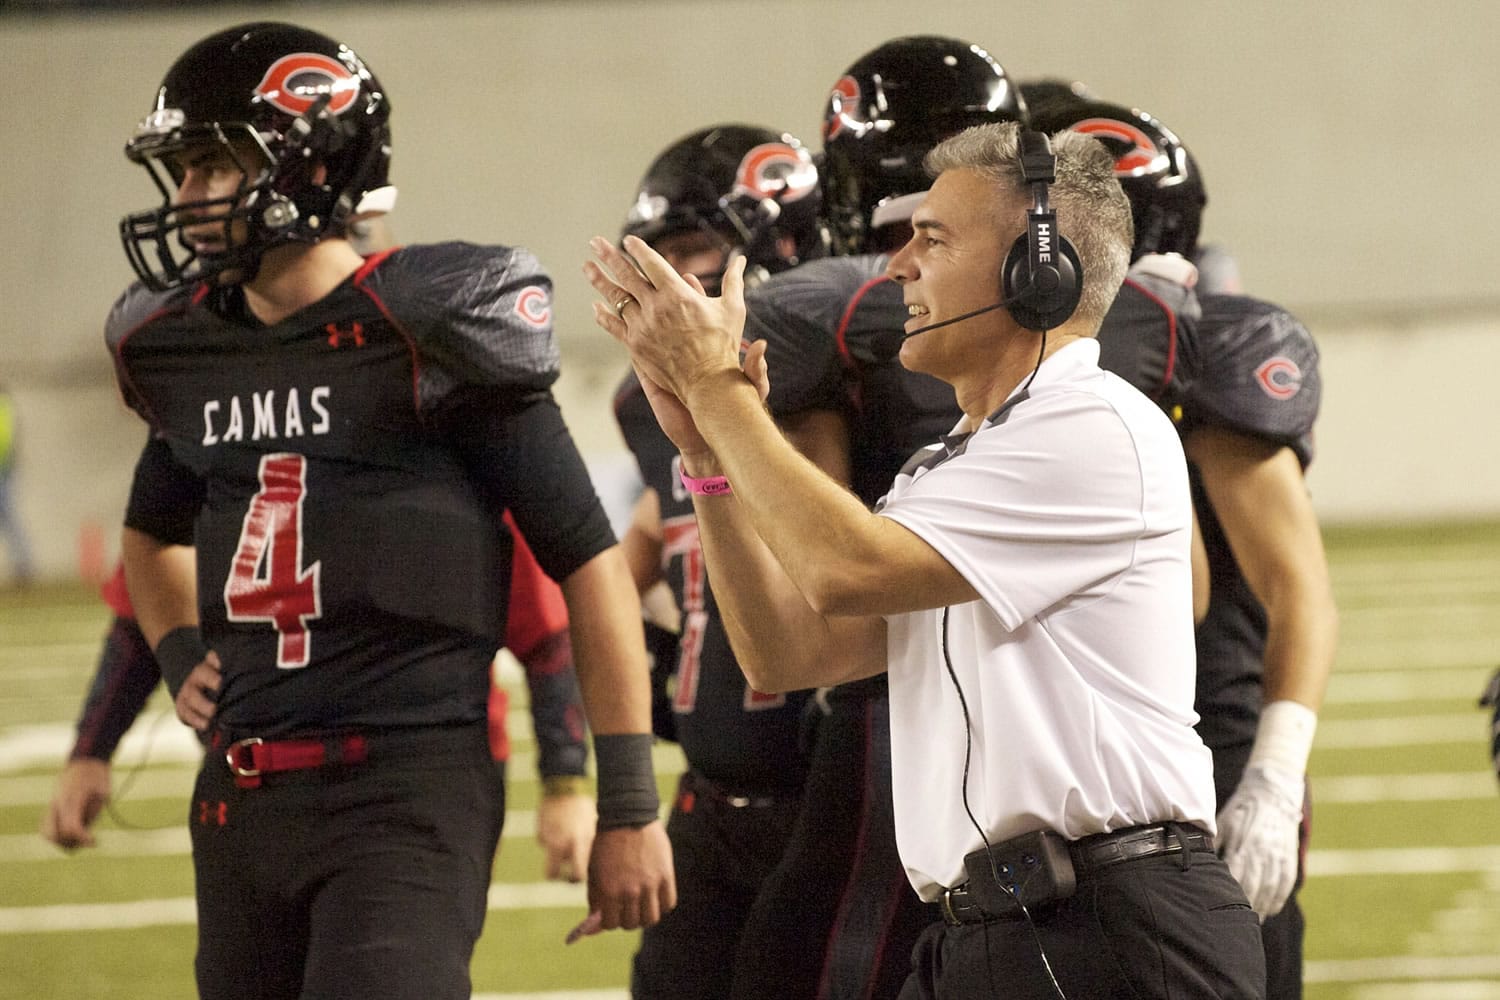 Camas High School head football coach Jon Eagle was cleared of wrongdoing Thursday by WIAA district directors in a recruiting case.